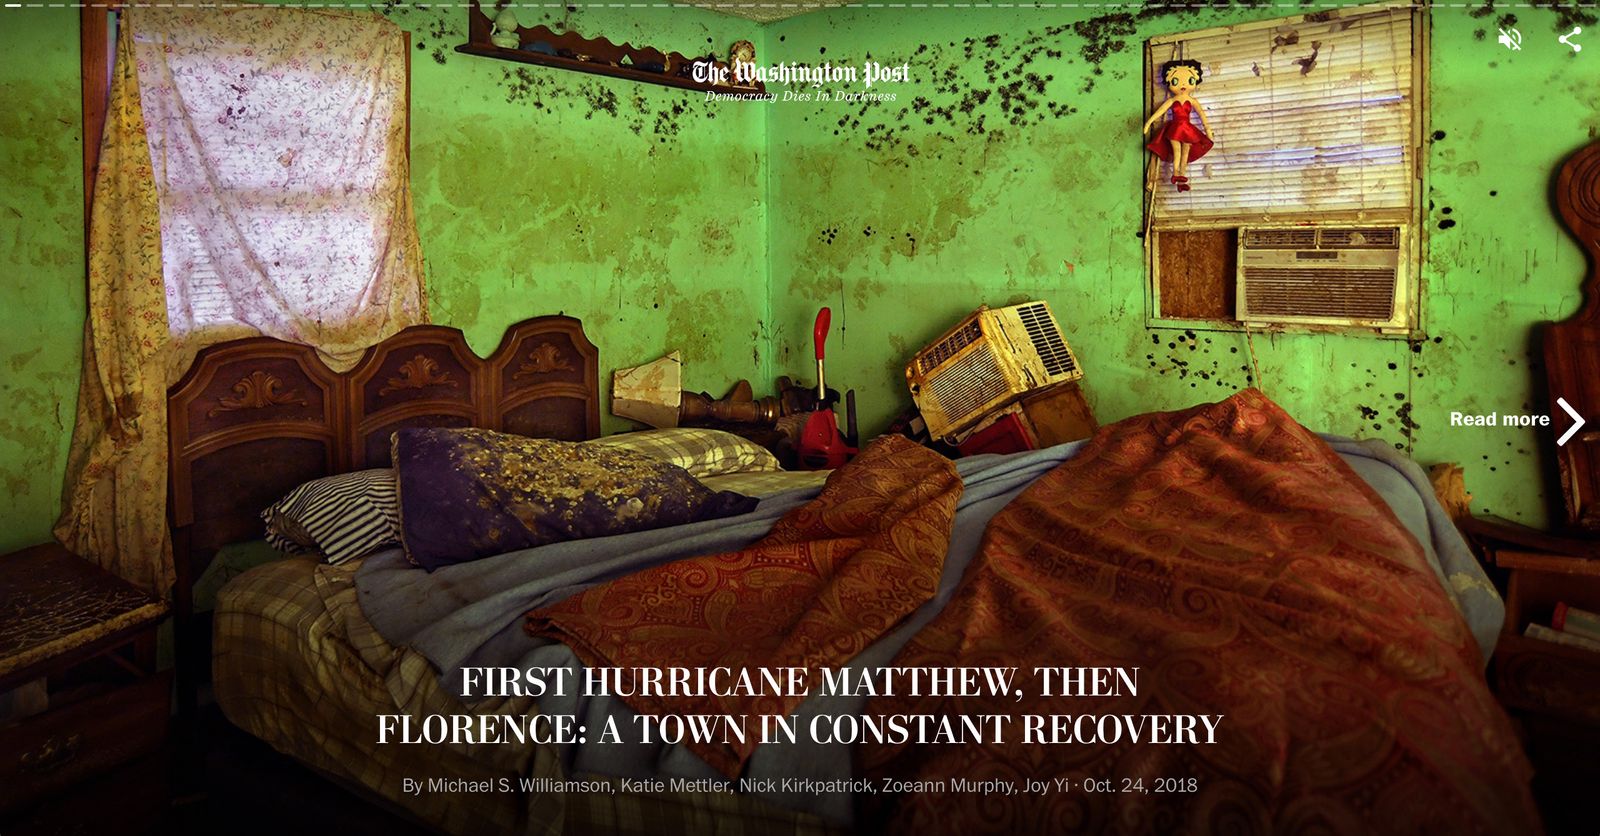 From The Washington Post feature A Town in Constant Recovery, edited by Nick Kirkpatrick